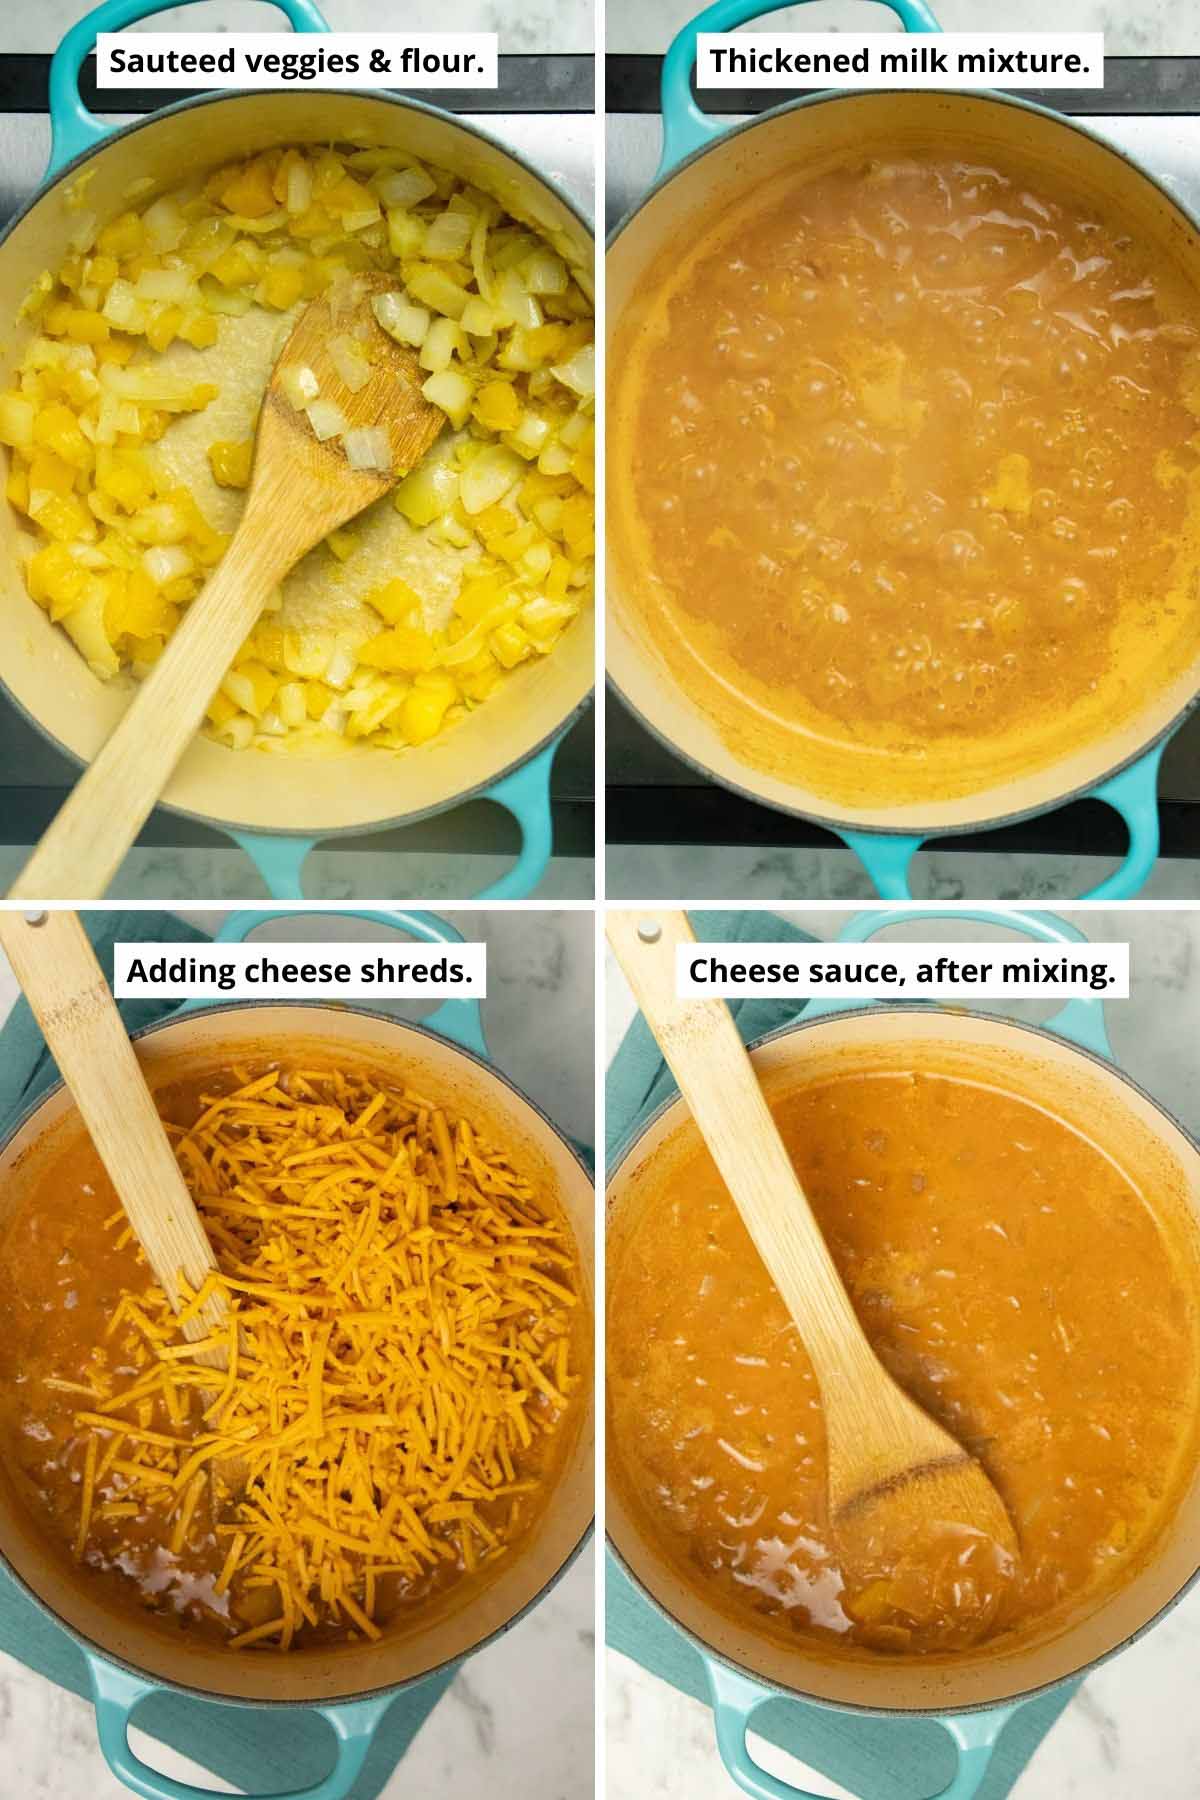 image collage showing the sautéed veggies and flour, the thickened milk mixture, adding the cheese to the sauce, and the cheese sauce after stirring in the cheese